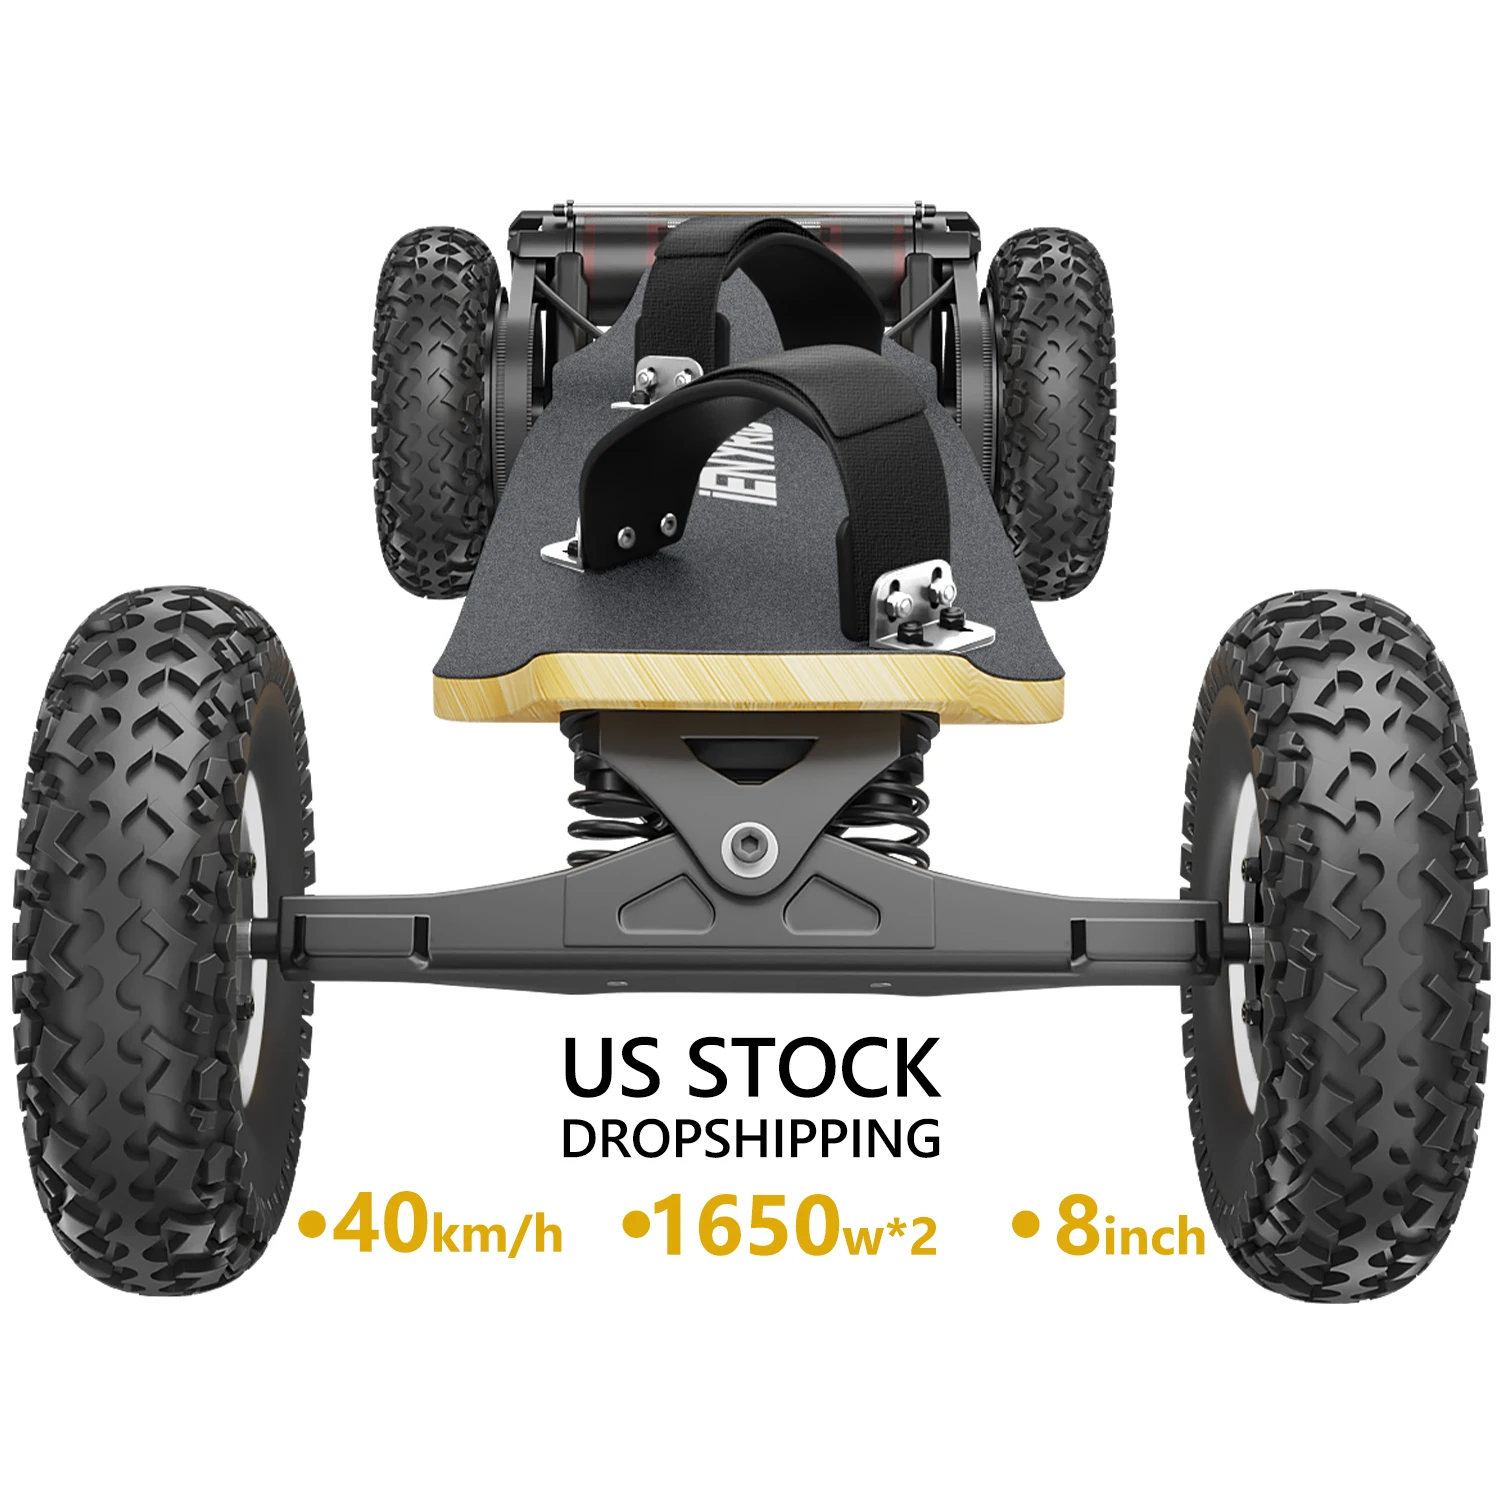 

Terrain off Road Skateboard Dual Motor Each 1650W*2 Max Load 180kg Electric Skateboard with Remote Consetrol USA warehouse